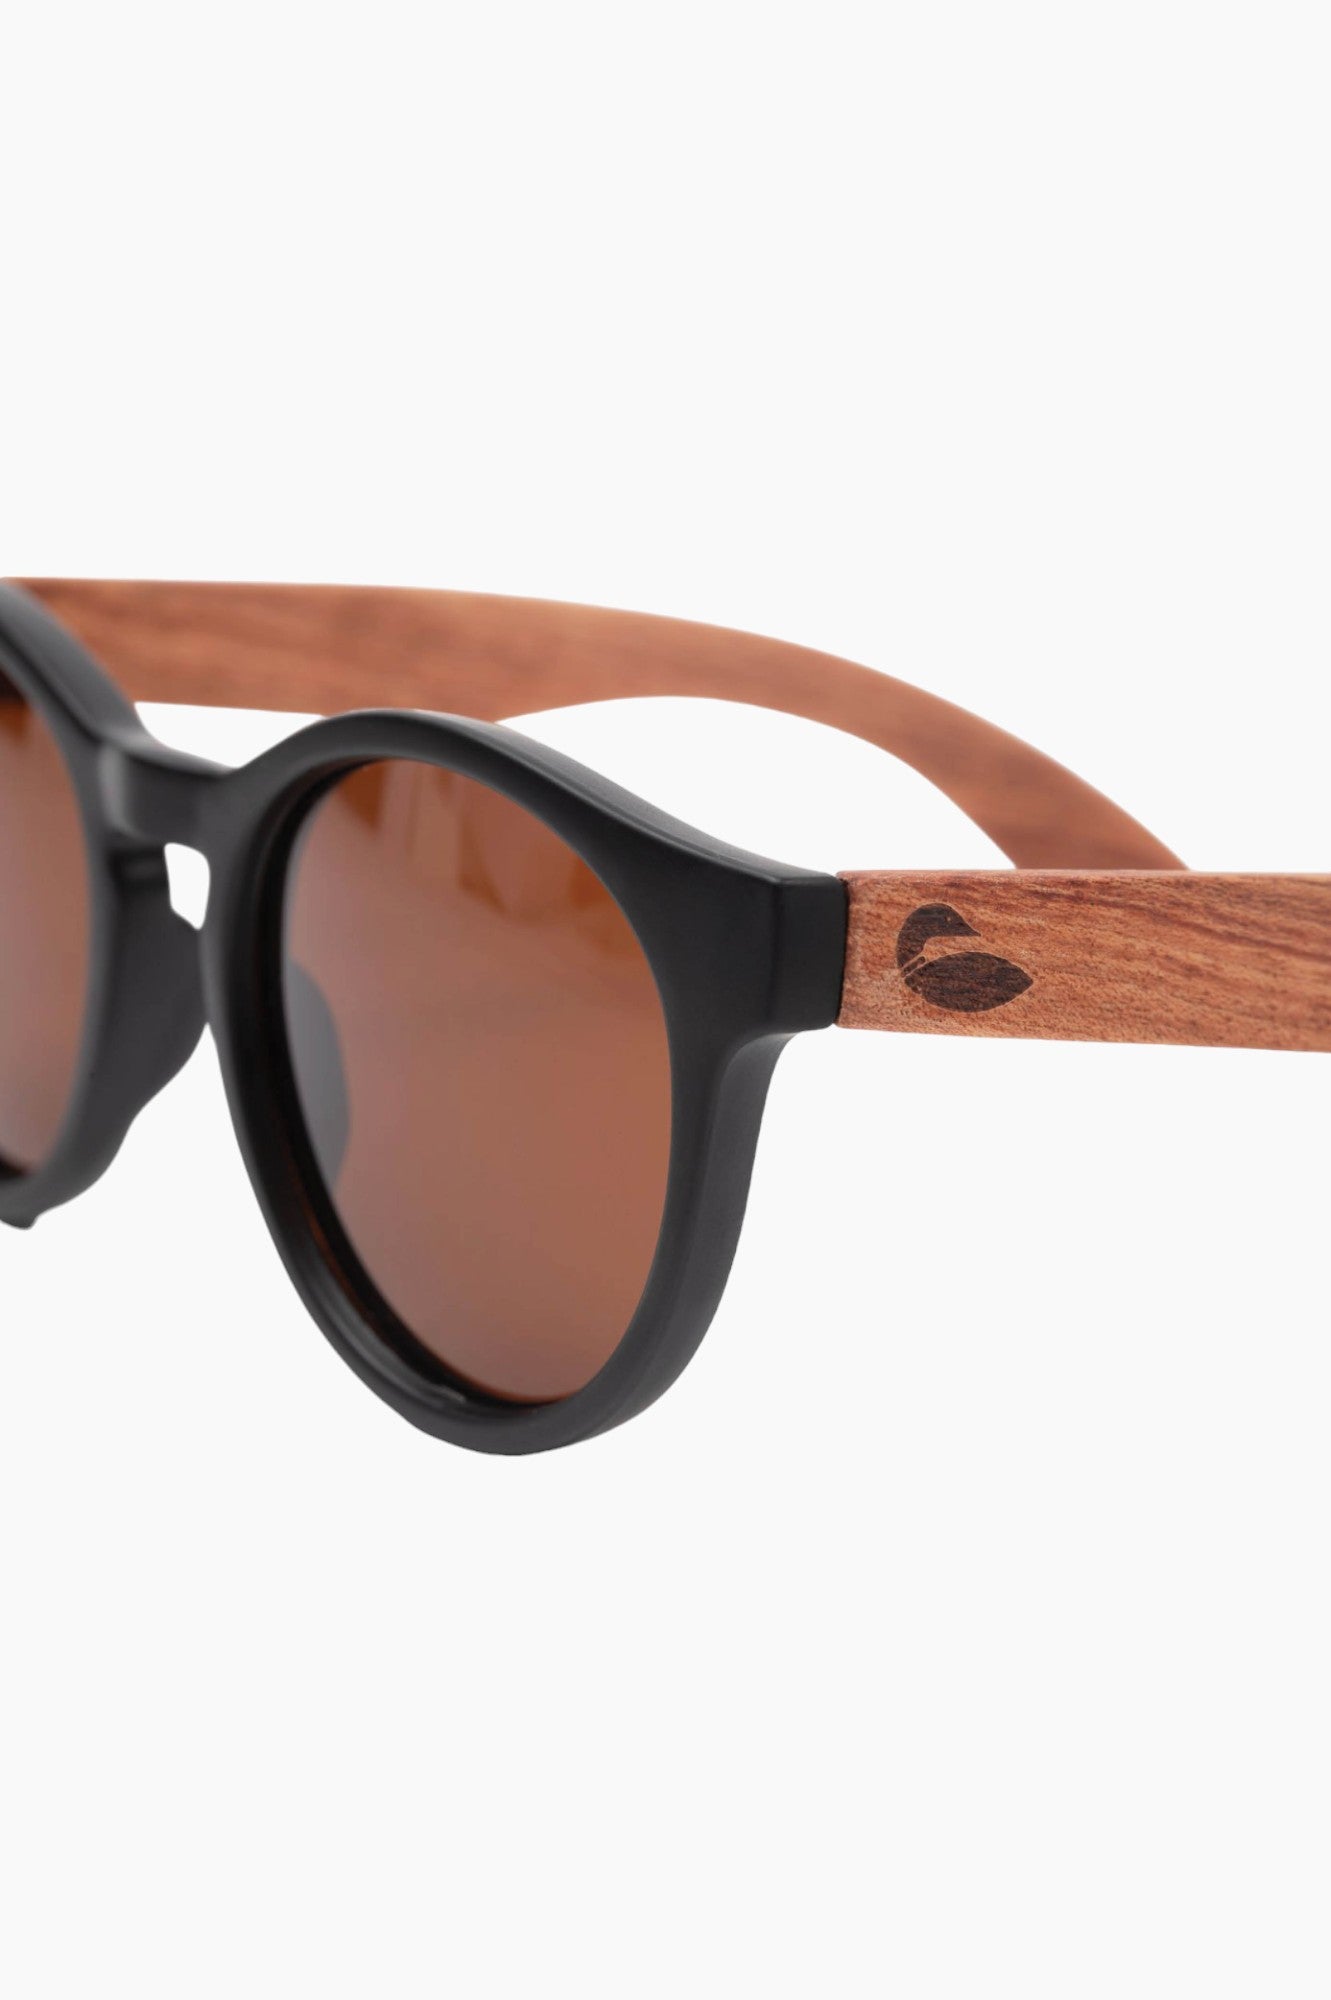 Matte black round sunglass frames with wood temple piece with a loon on them.